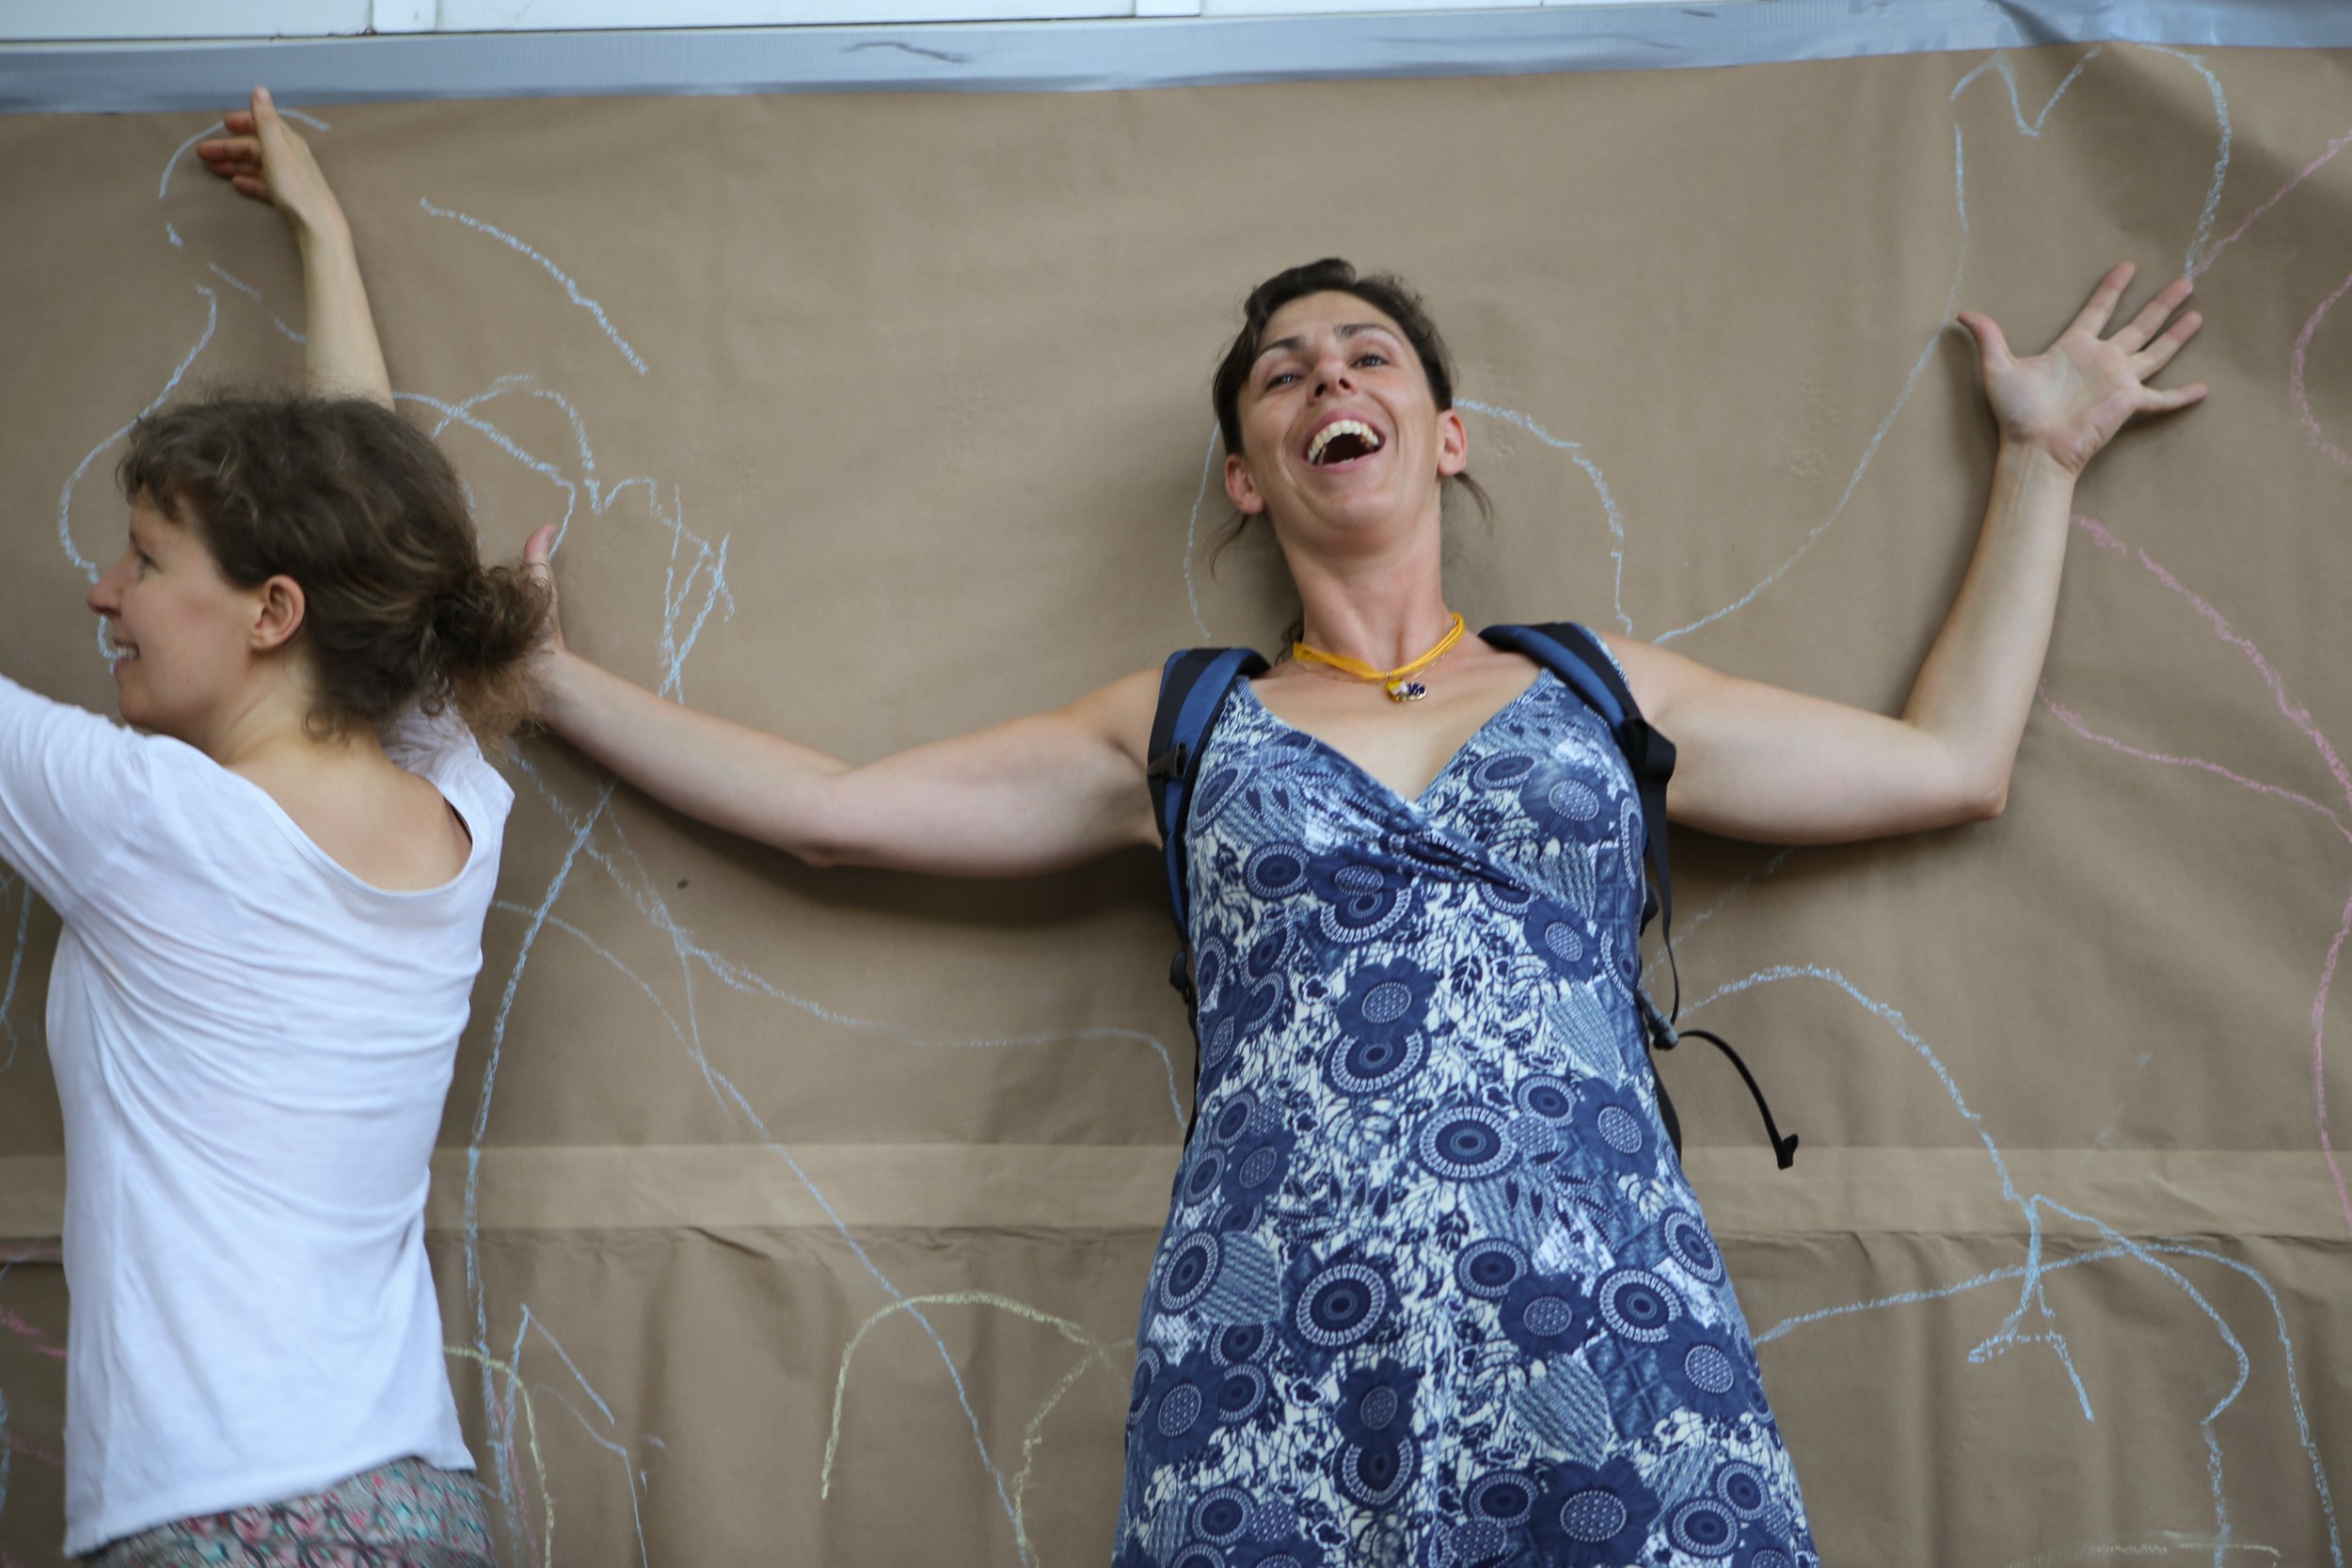 Woman laughing against a wall, with chalk tracings of body poses behind her